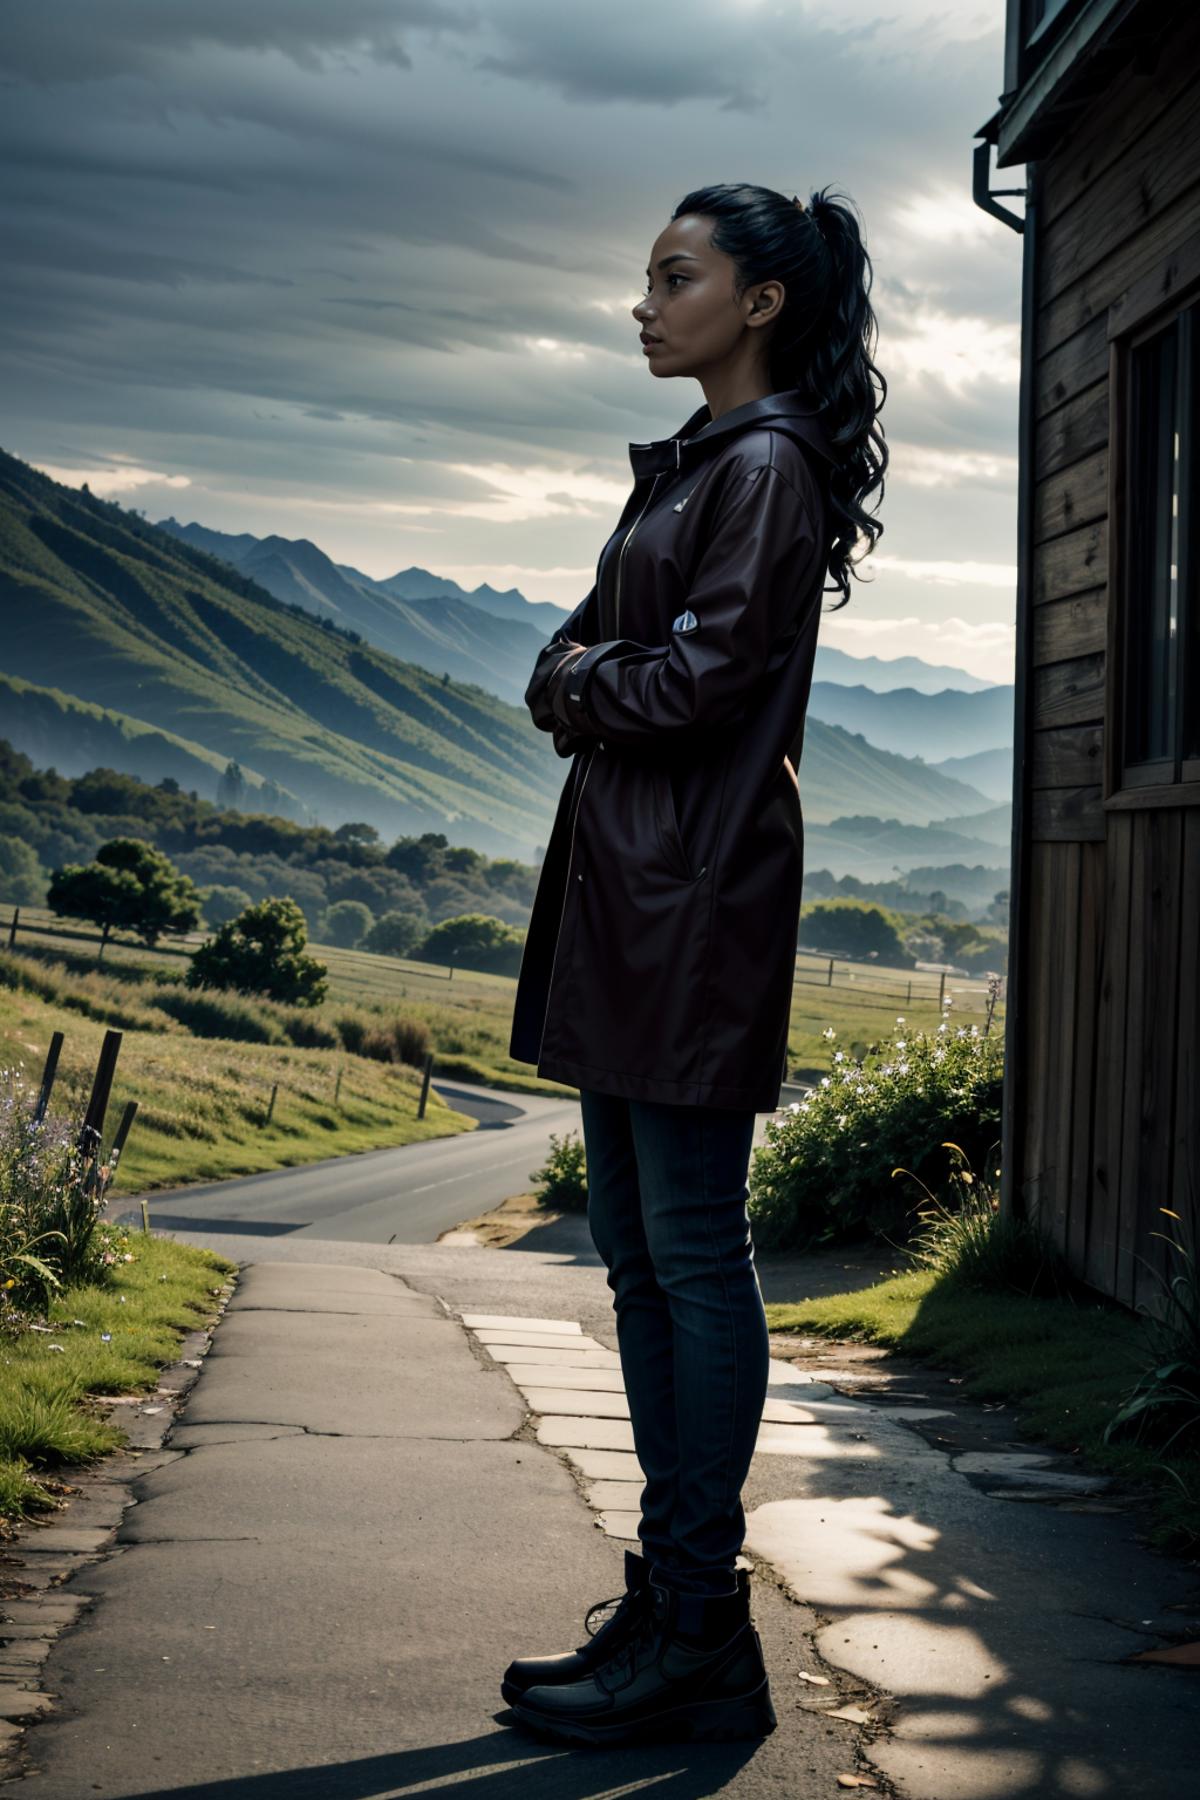 Saga Anderson from Alan Wake 2 image by BloodRedKittie